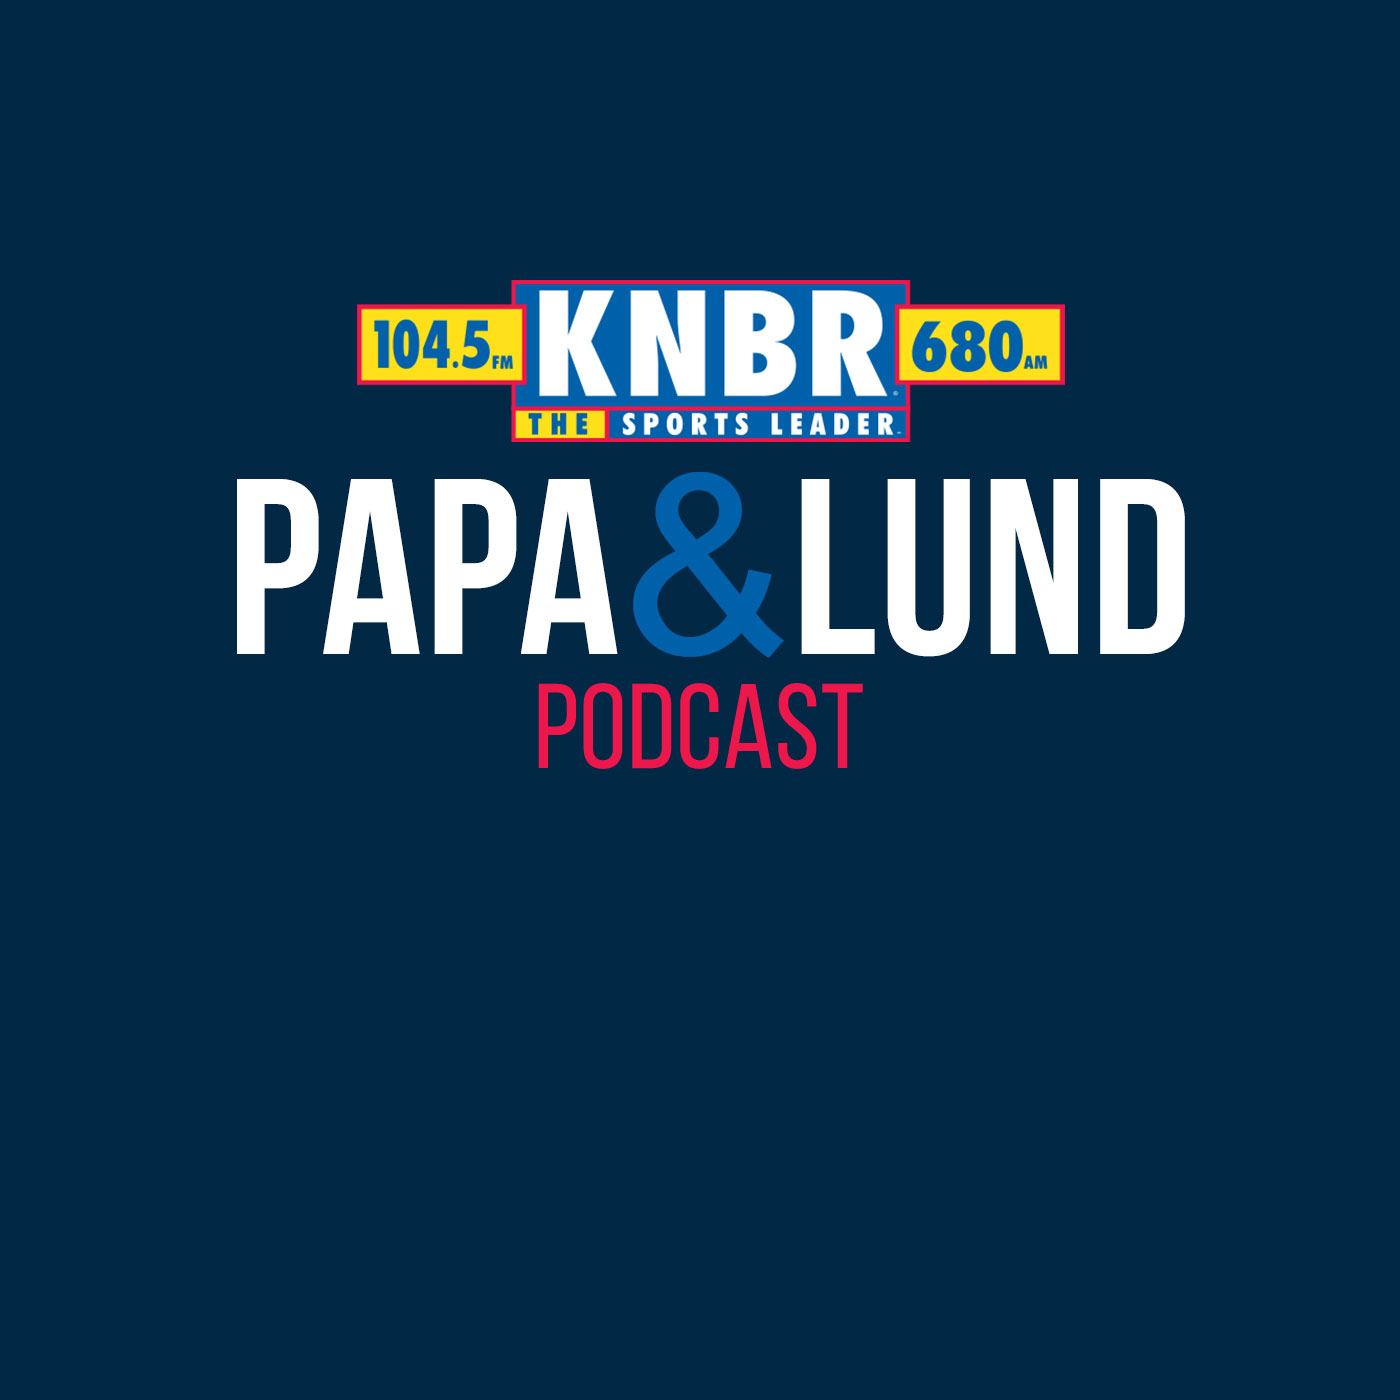 6-23 Andrew Baggarly discusses the Giants recent surge and  previews Giants vs Diamondbacks with Papa & Lund